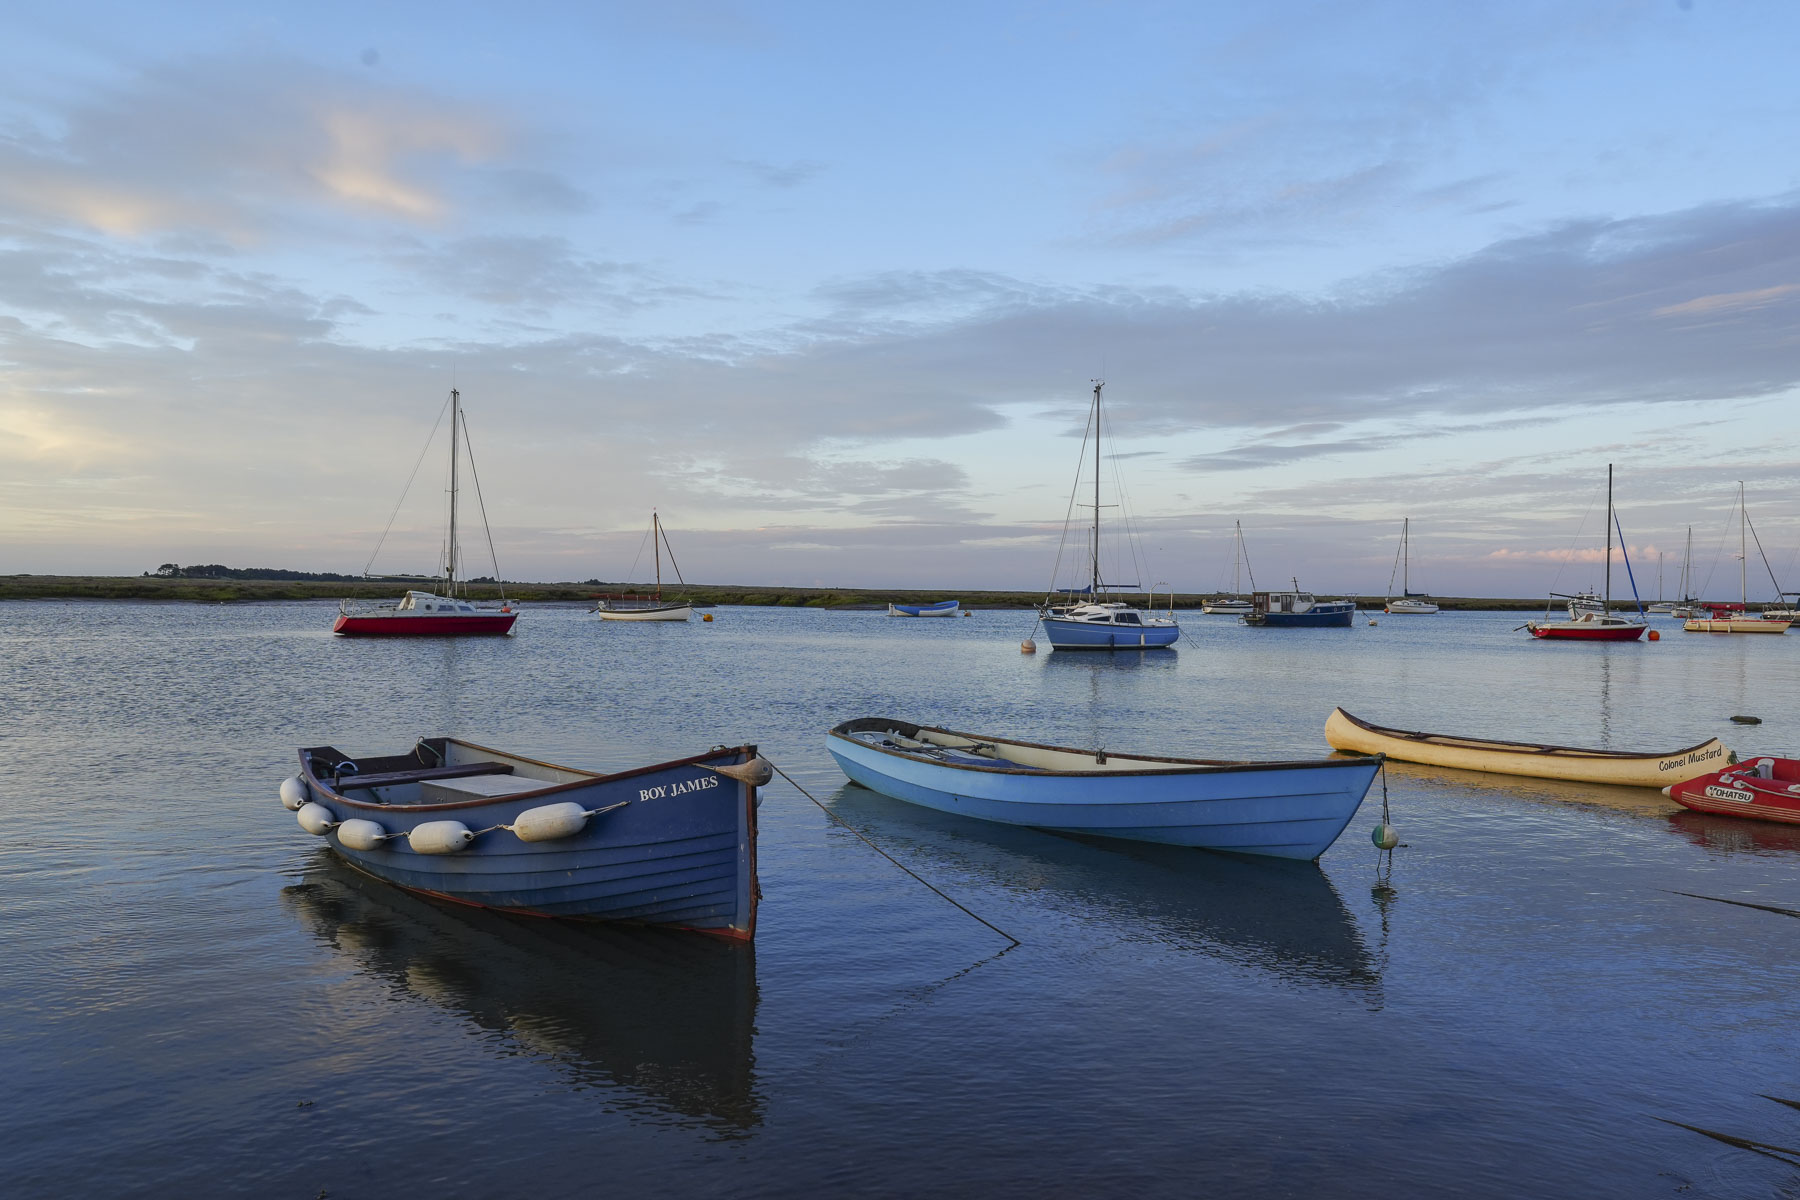 Boats on calm waters, captured with the Sony A7C II full-frame mirrorless camera